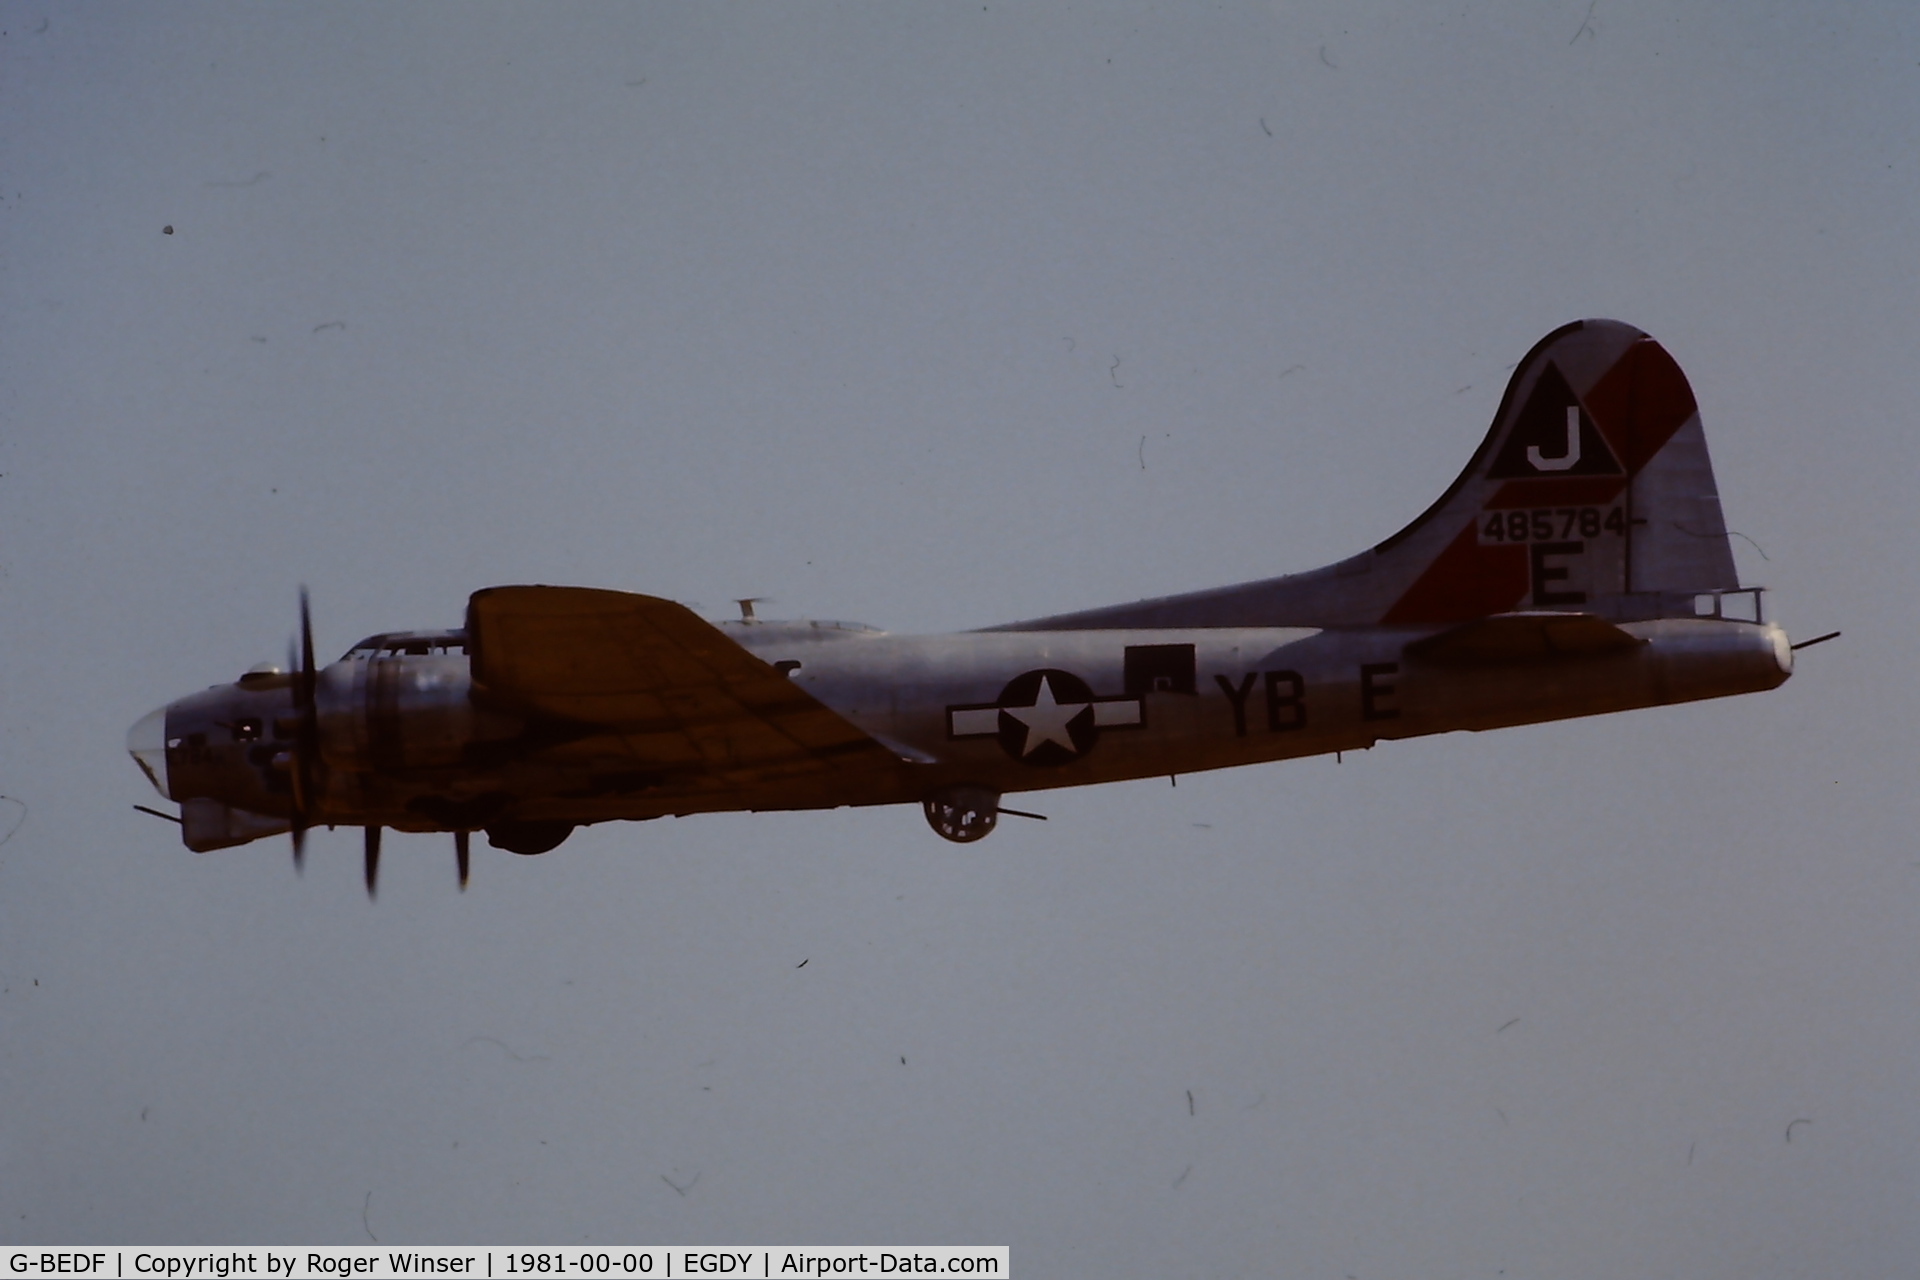 G-BEDF, 1944 Boeing B-17G Flying Fortress C/N 8693, 44-85784 as YB-E Ginger Rogers at RNAS Yeovilton Naval Air Day 1981? Repainted olive drab she became Sally B